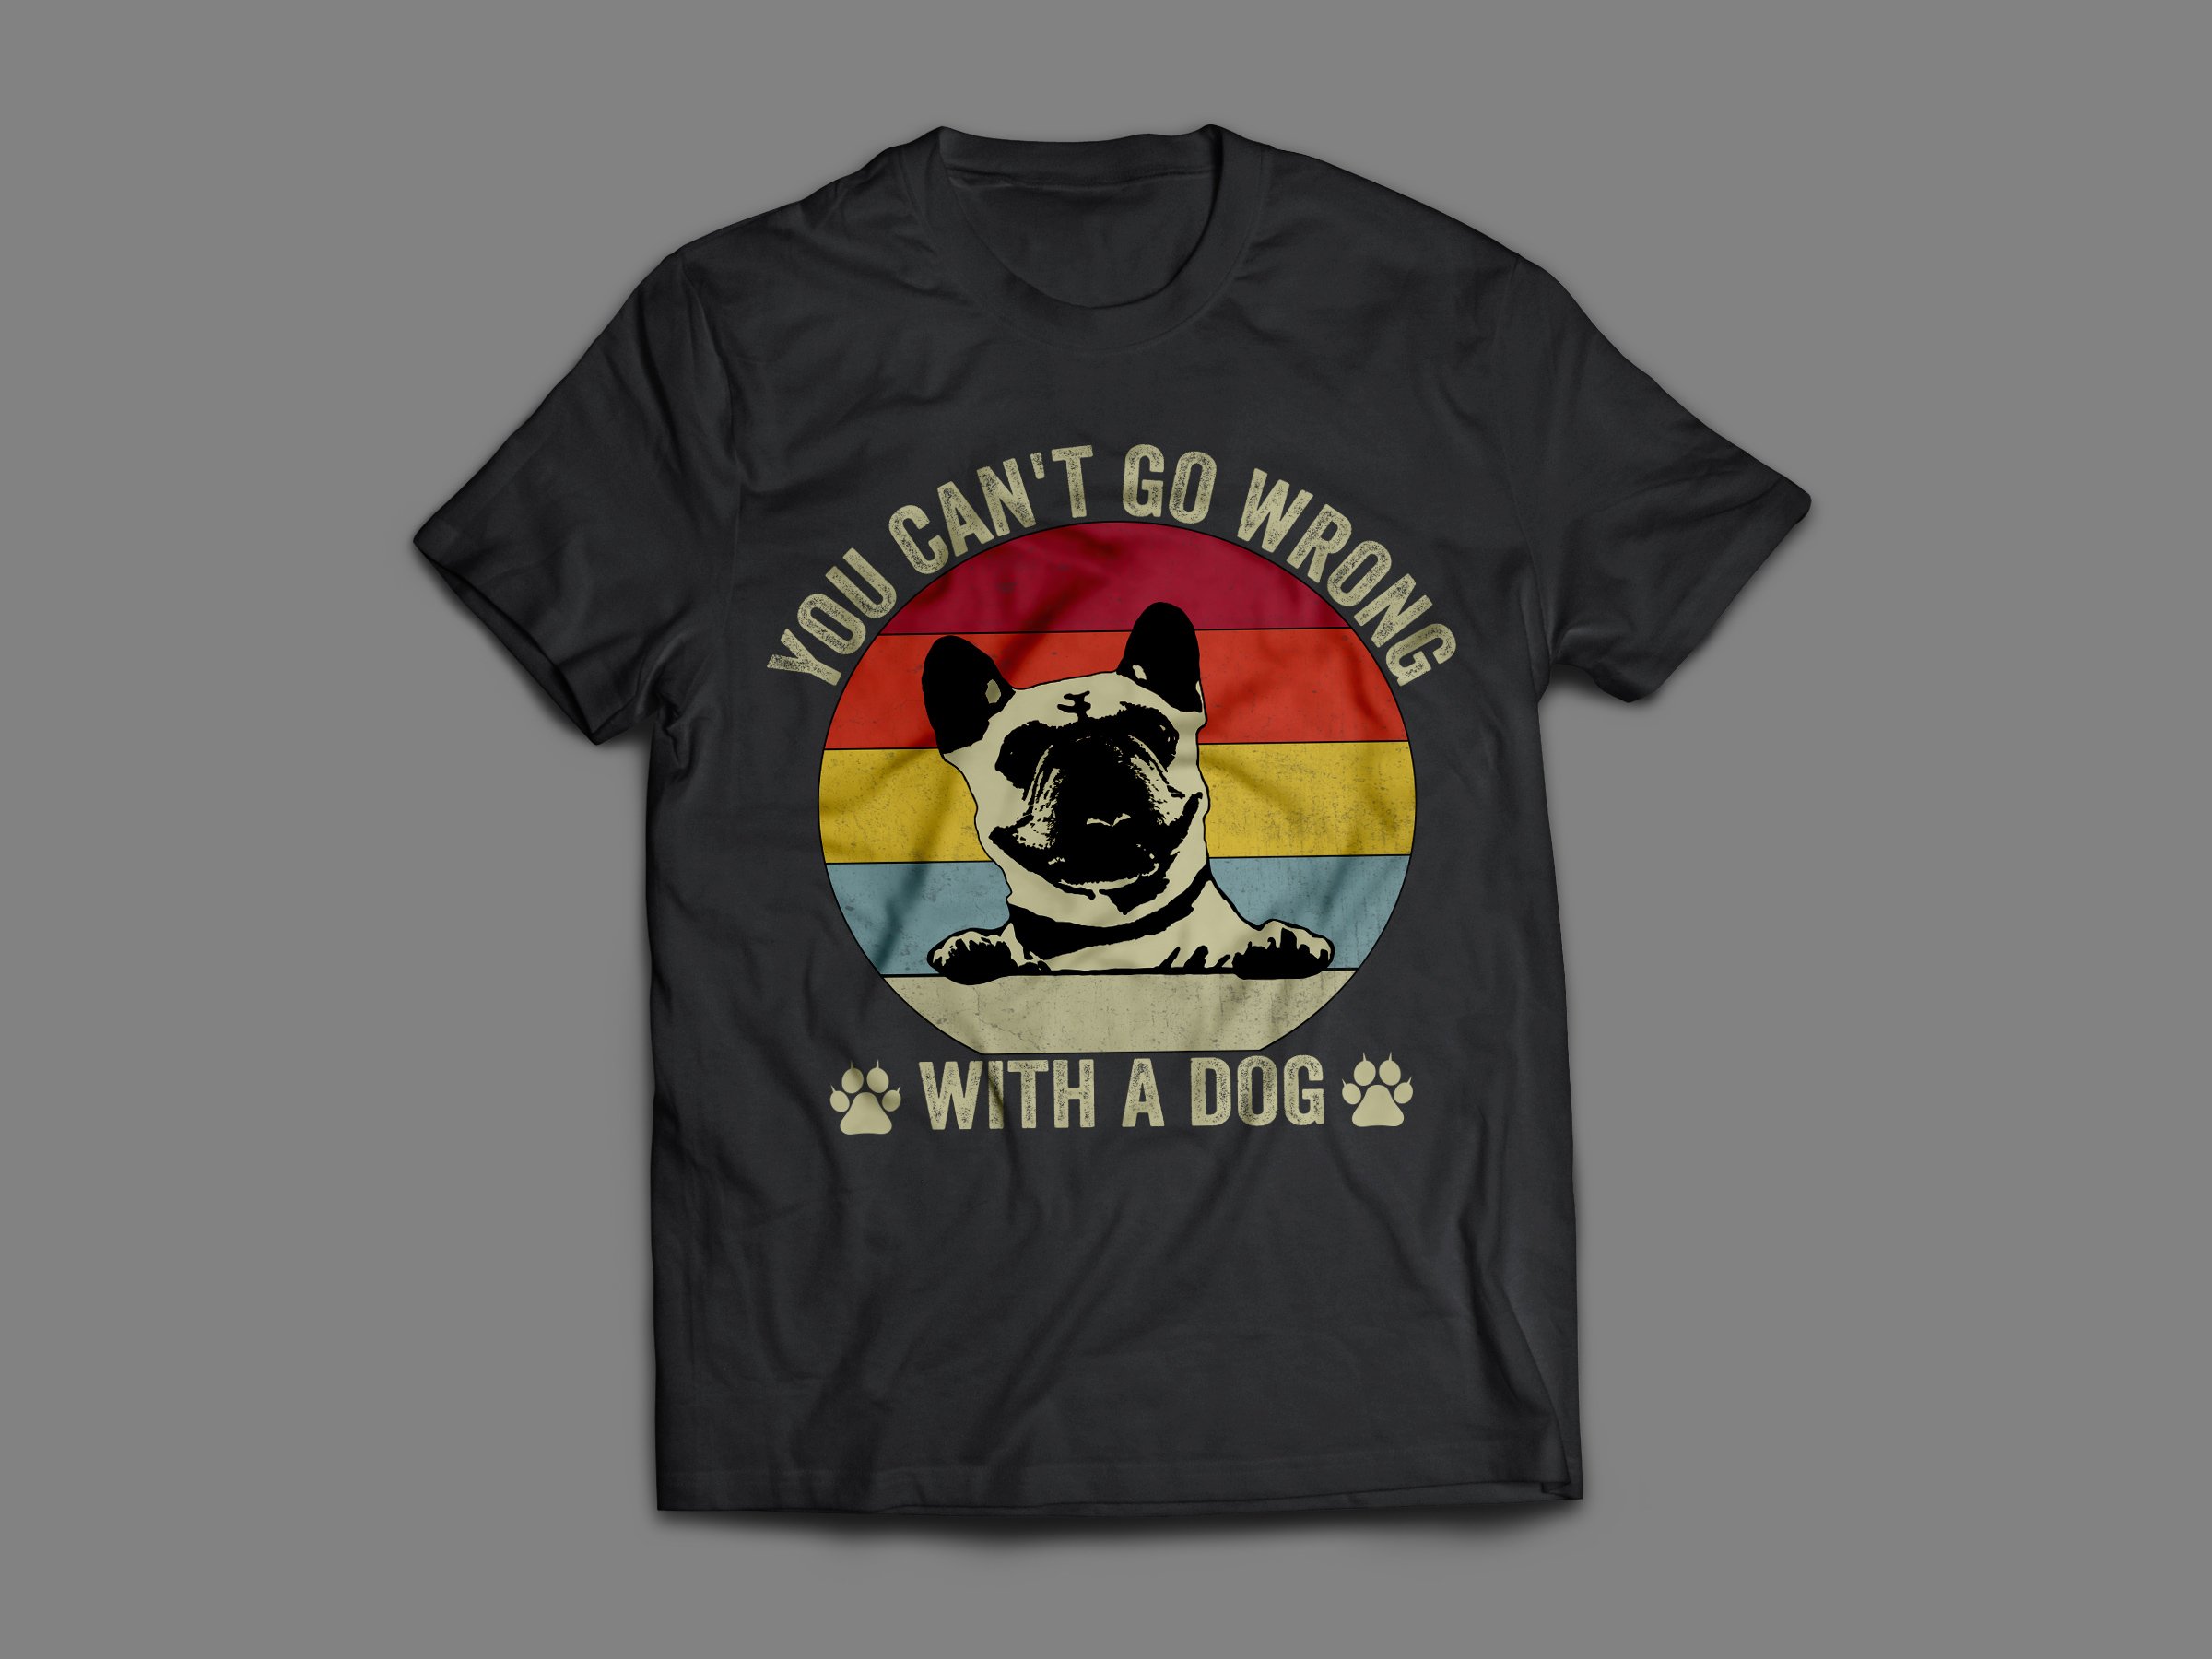 Simple black t-shirt with a so colorful dog.